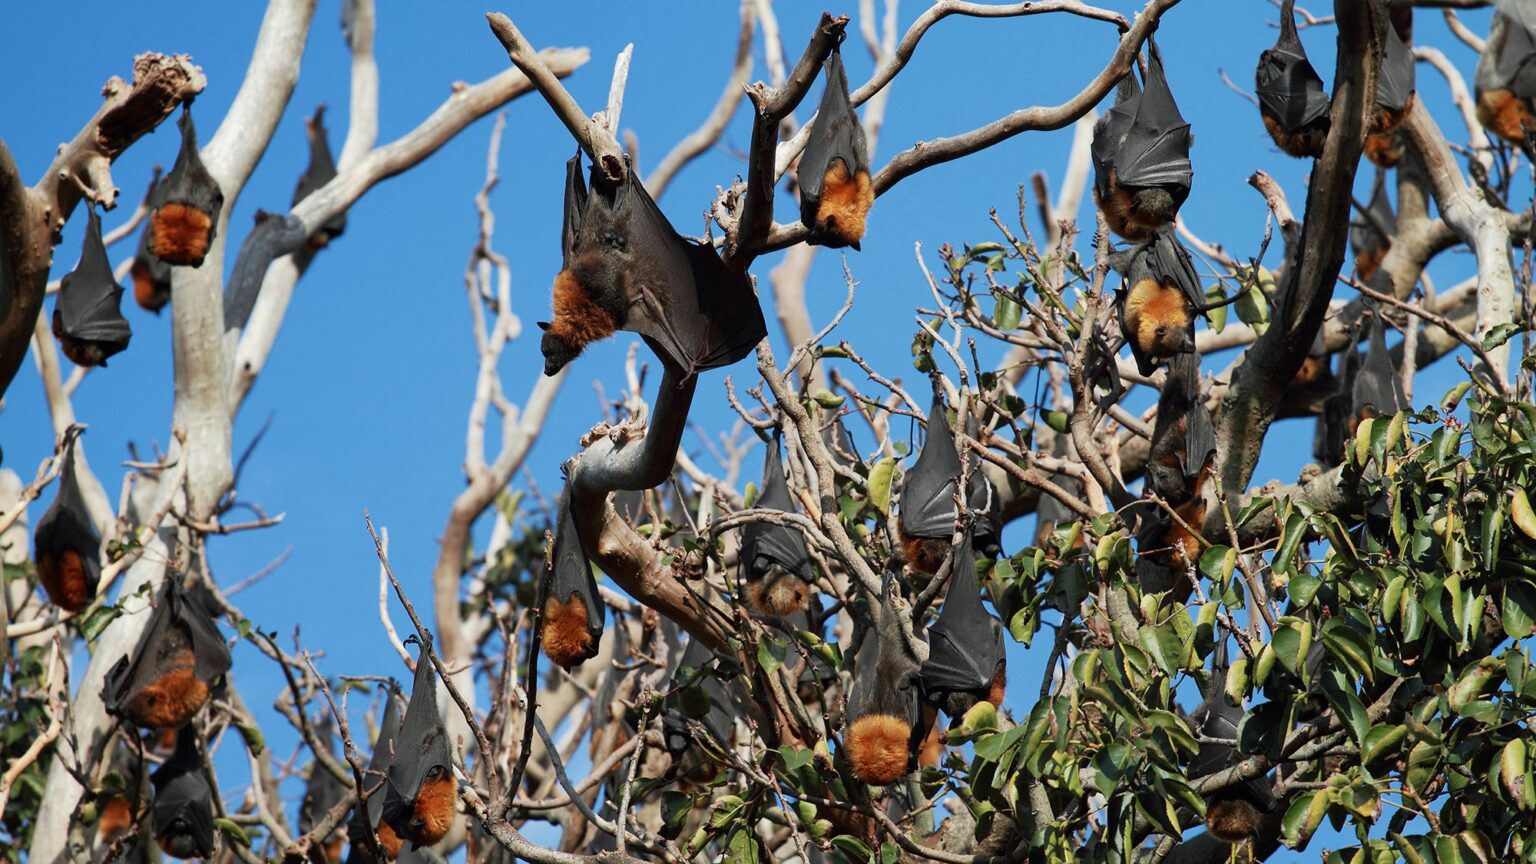 flying foxes aka bats in trees spreading disease potentially